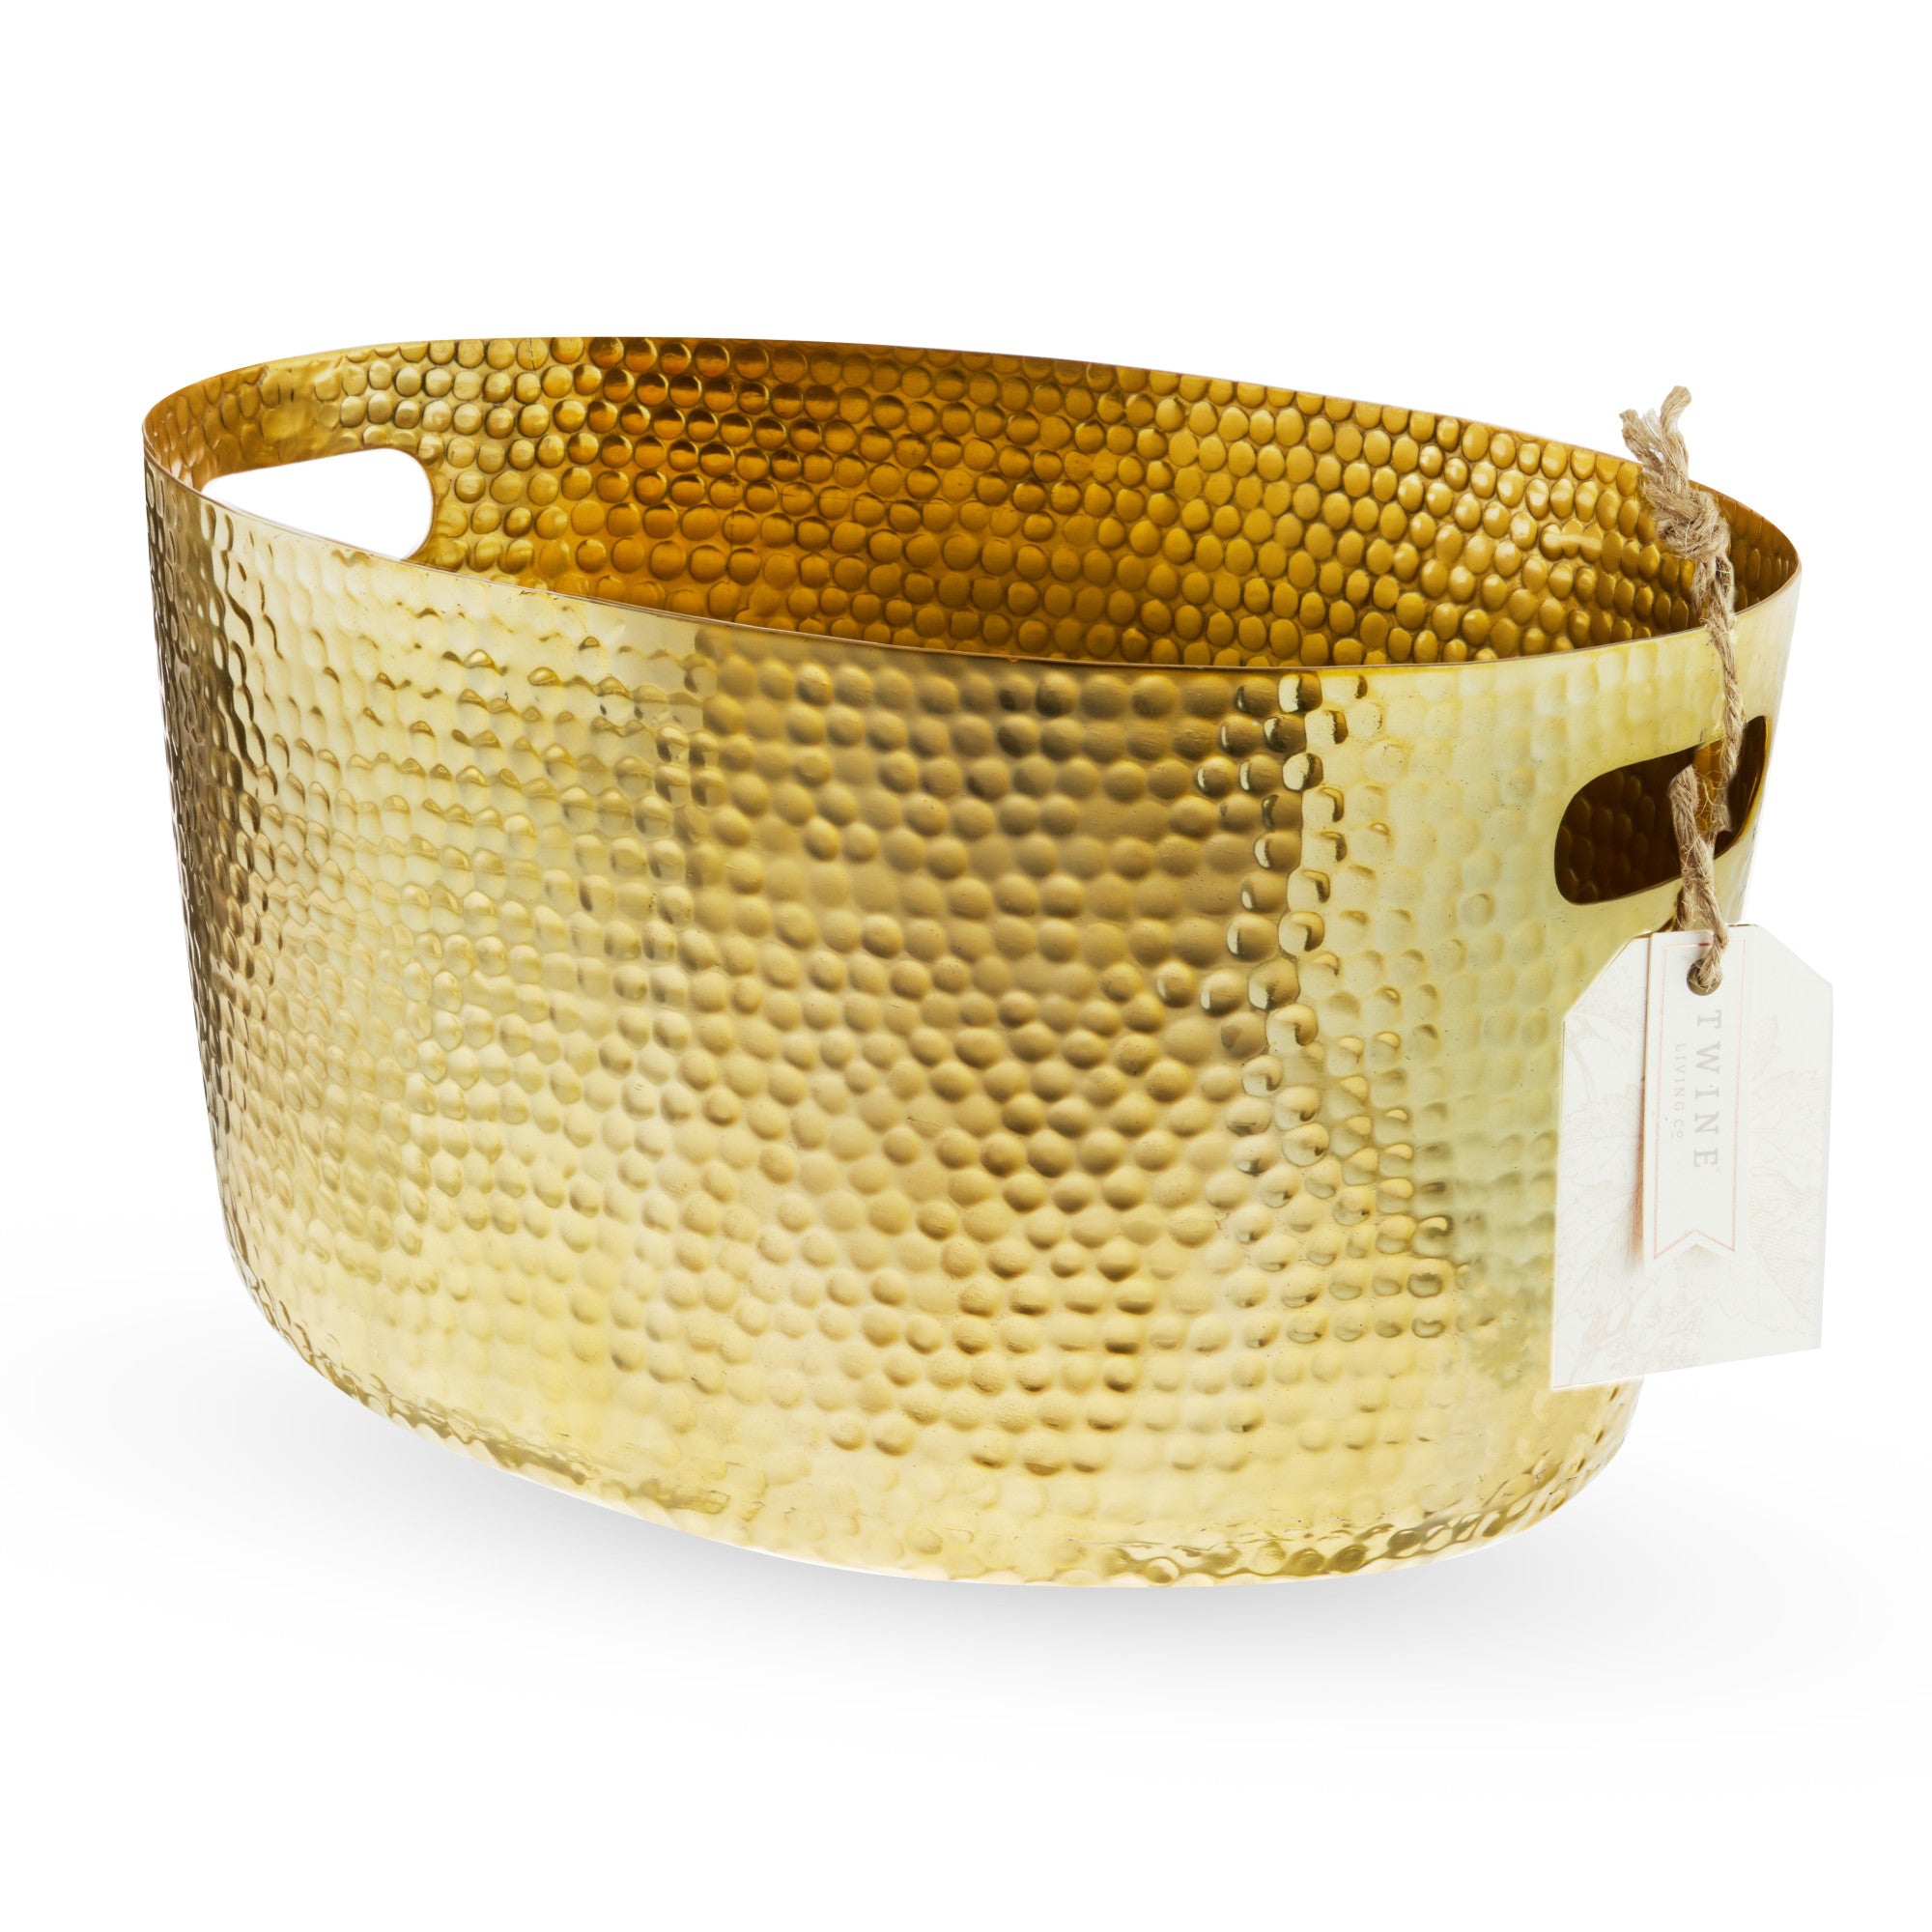 Gold Hammered Tub by Twine (10616)